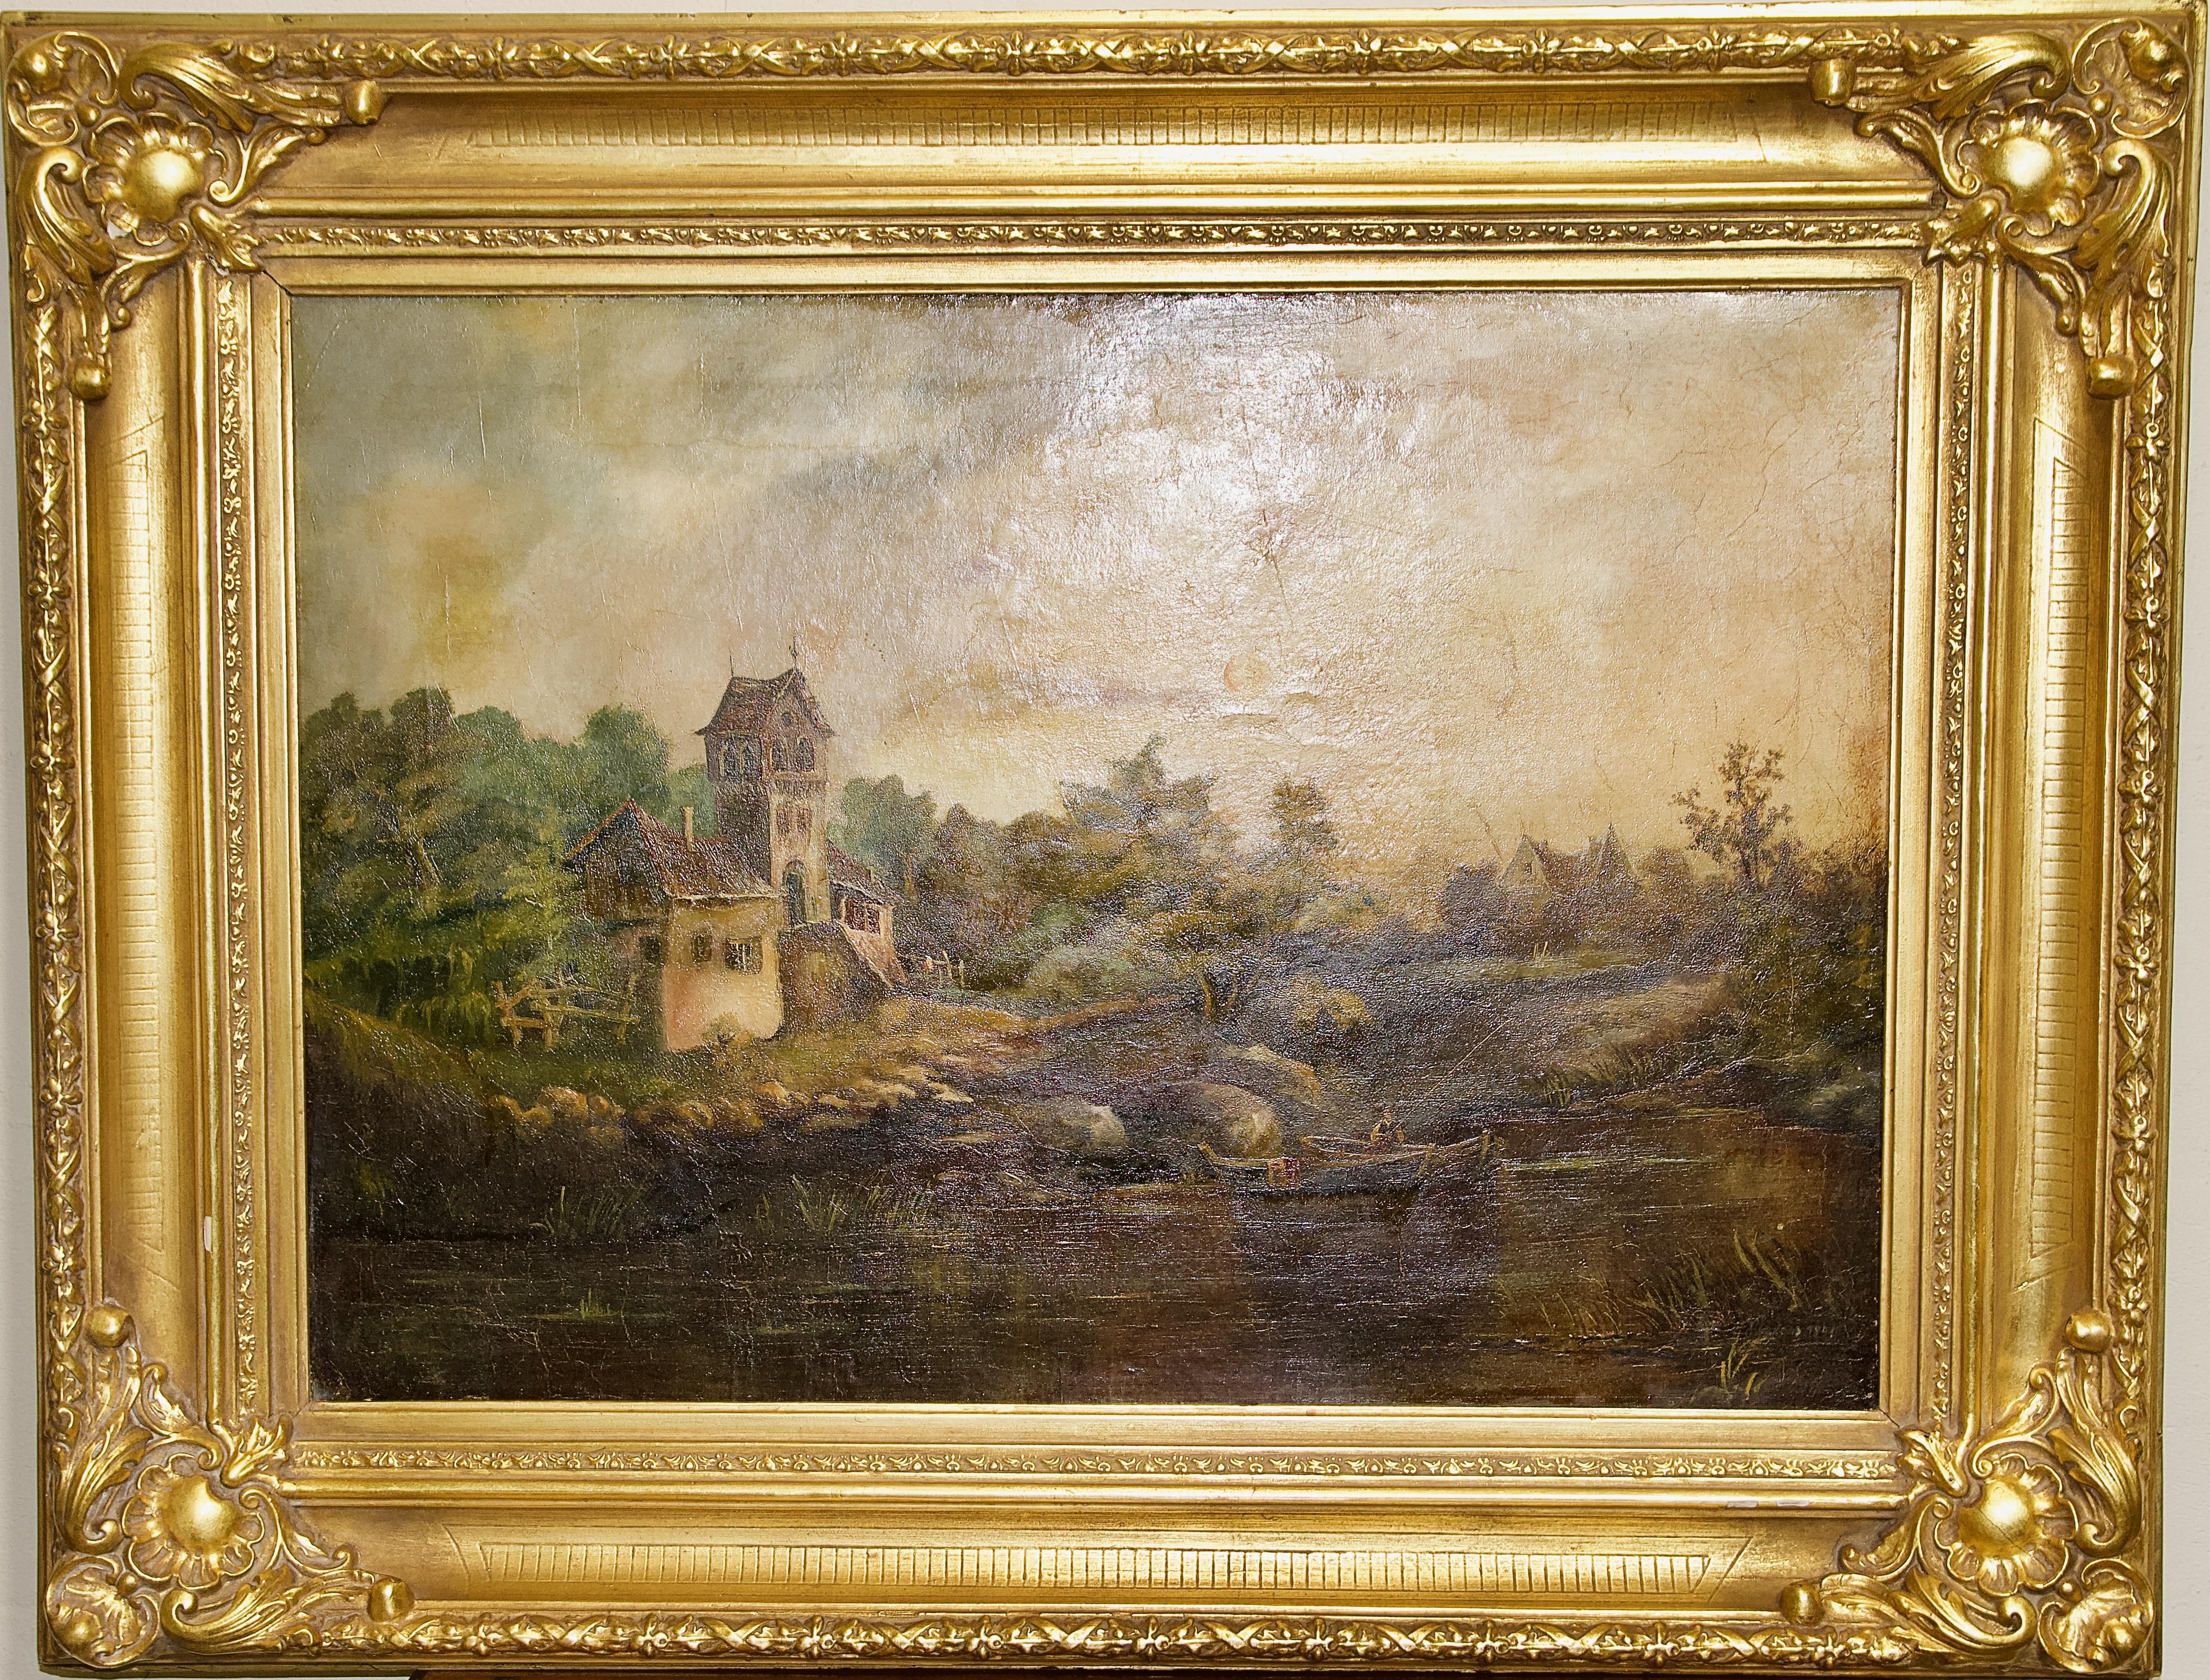 Antique, Romantic Oil Painting, 19th Century. Old Hunting Lodge at the Lake.